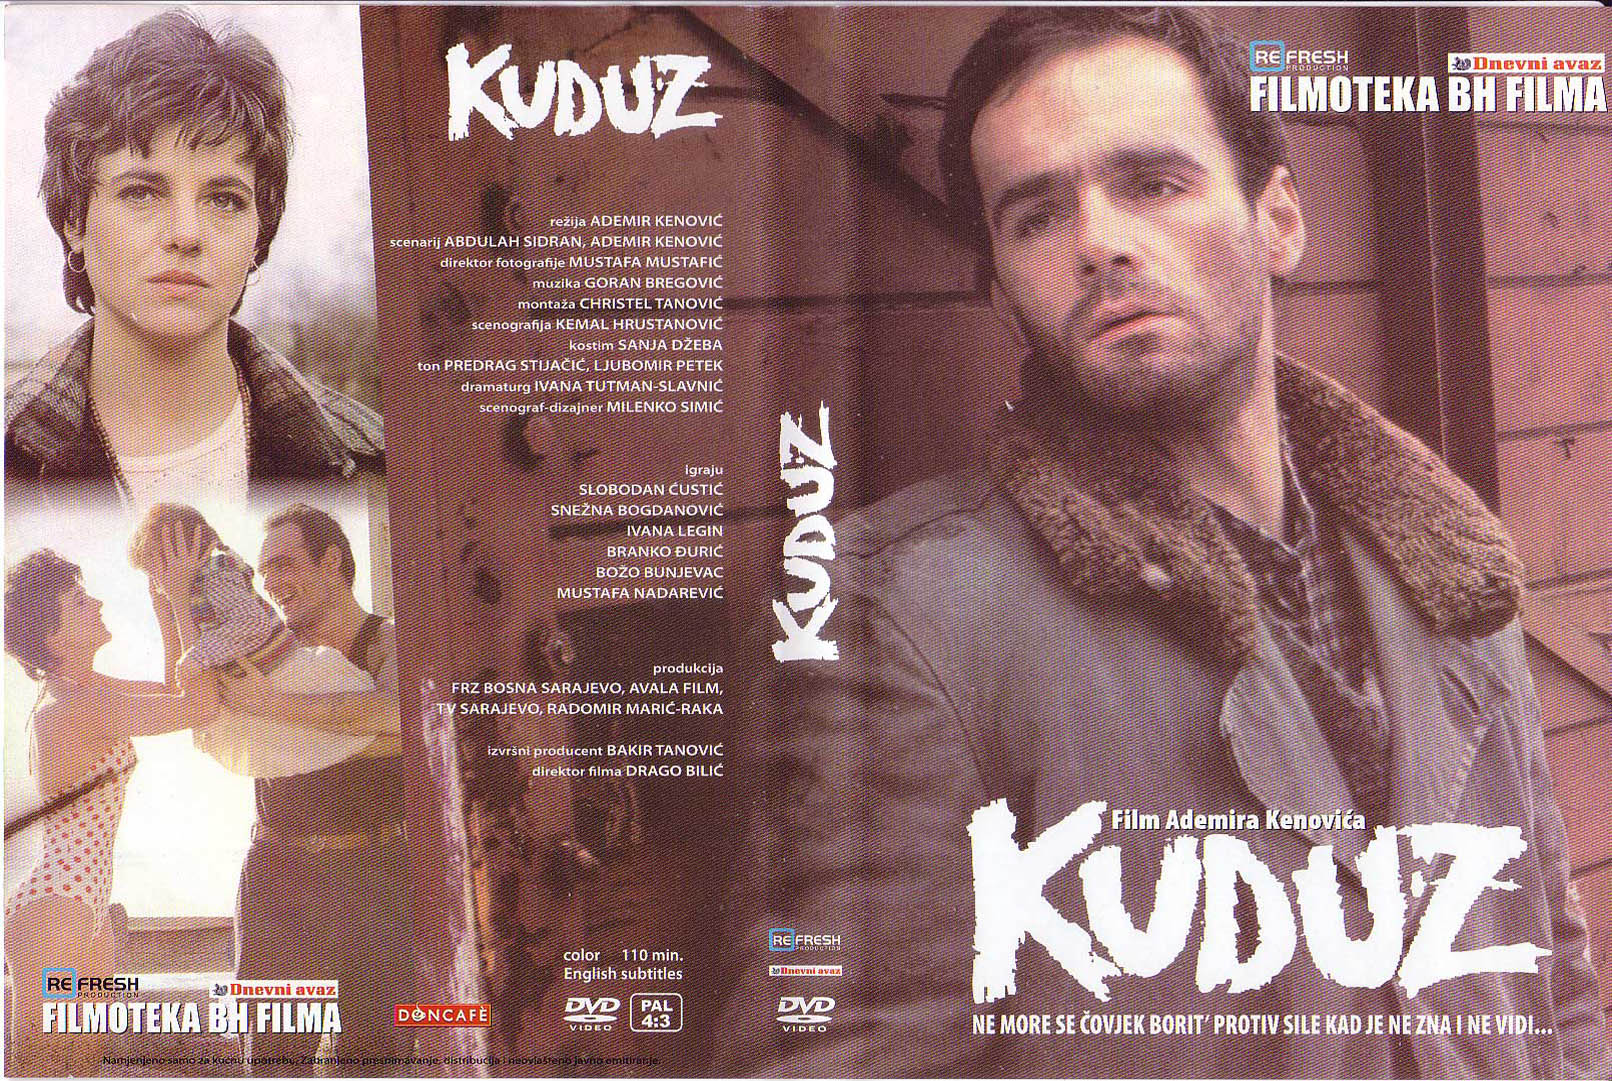 Click to view full size image -  DVD Cover - K - kuduz_original_dvd - kuduz_original_dvd.jpg